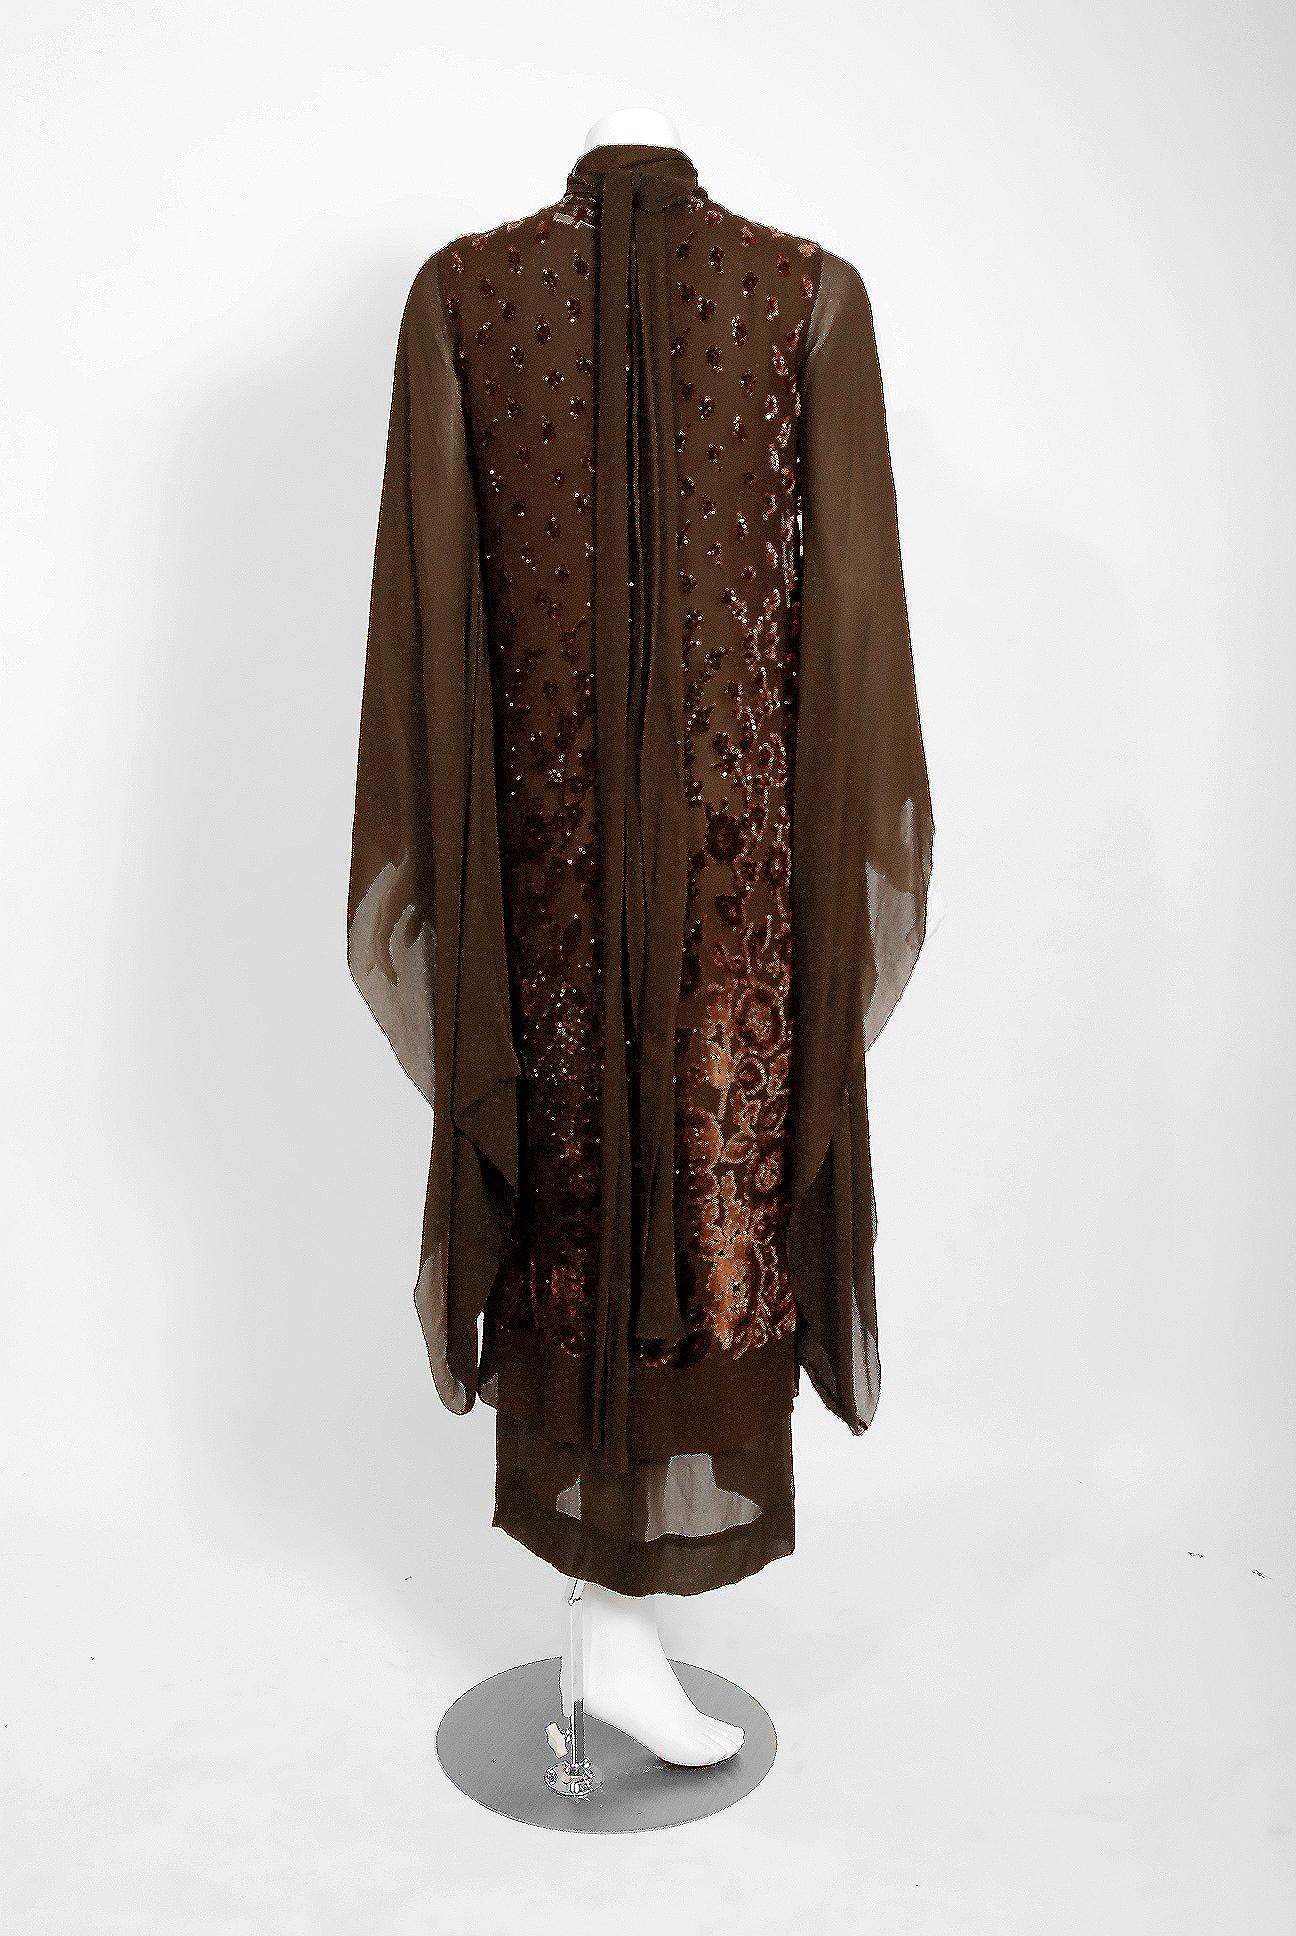 1969 Christian Dior Haute-Couture Brown Floral Flocked Silk Kimono Sleeve Gown 2